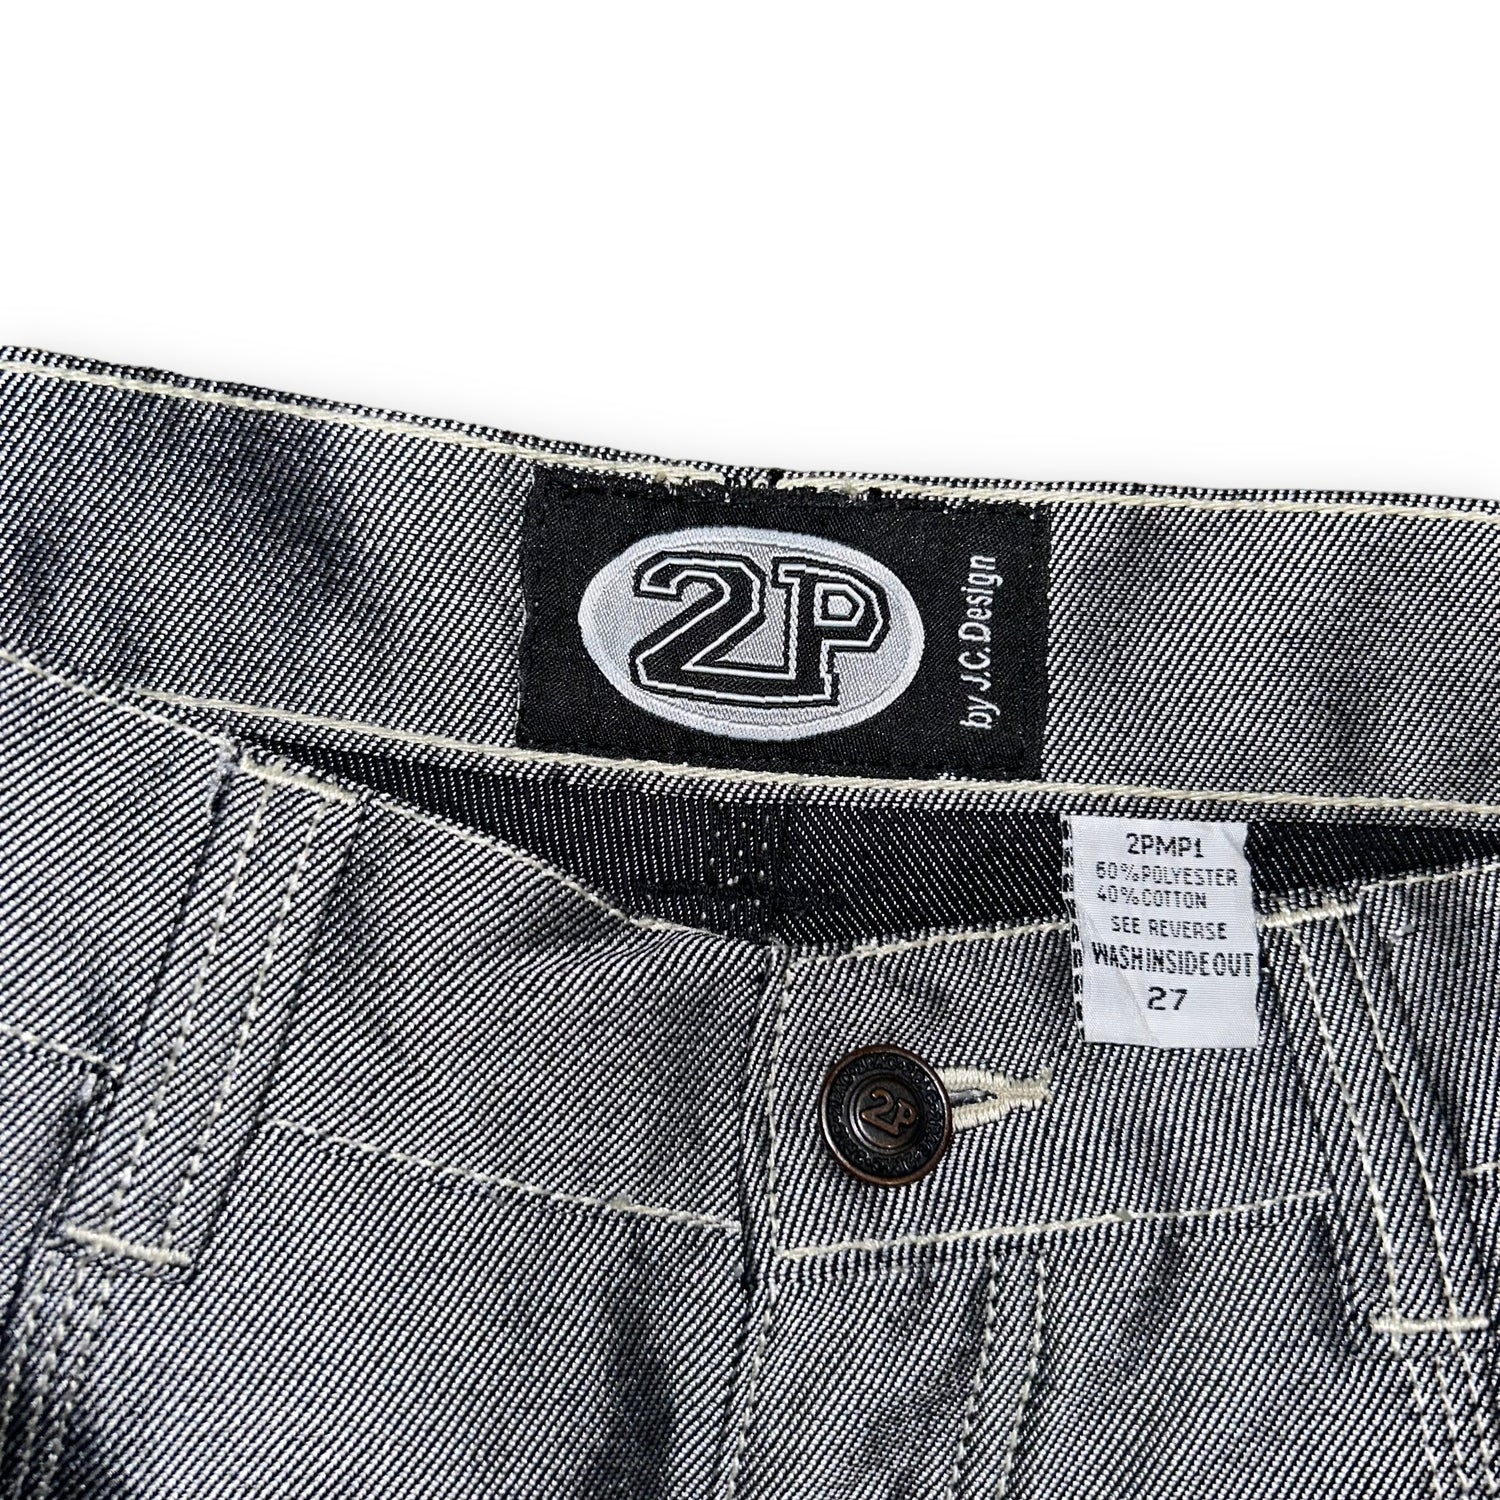 Baggy jeans 2PAC The Collection Shiny (26 USA XXS) - oldstyleclothing